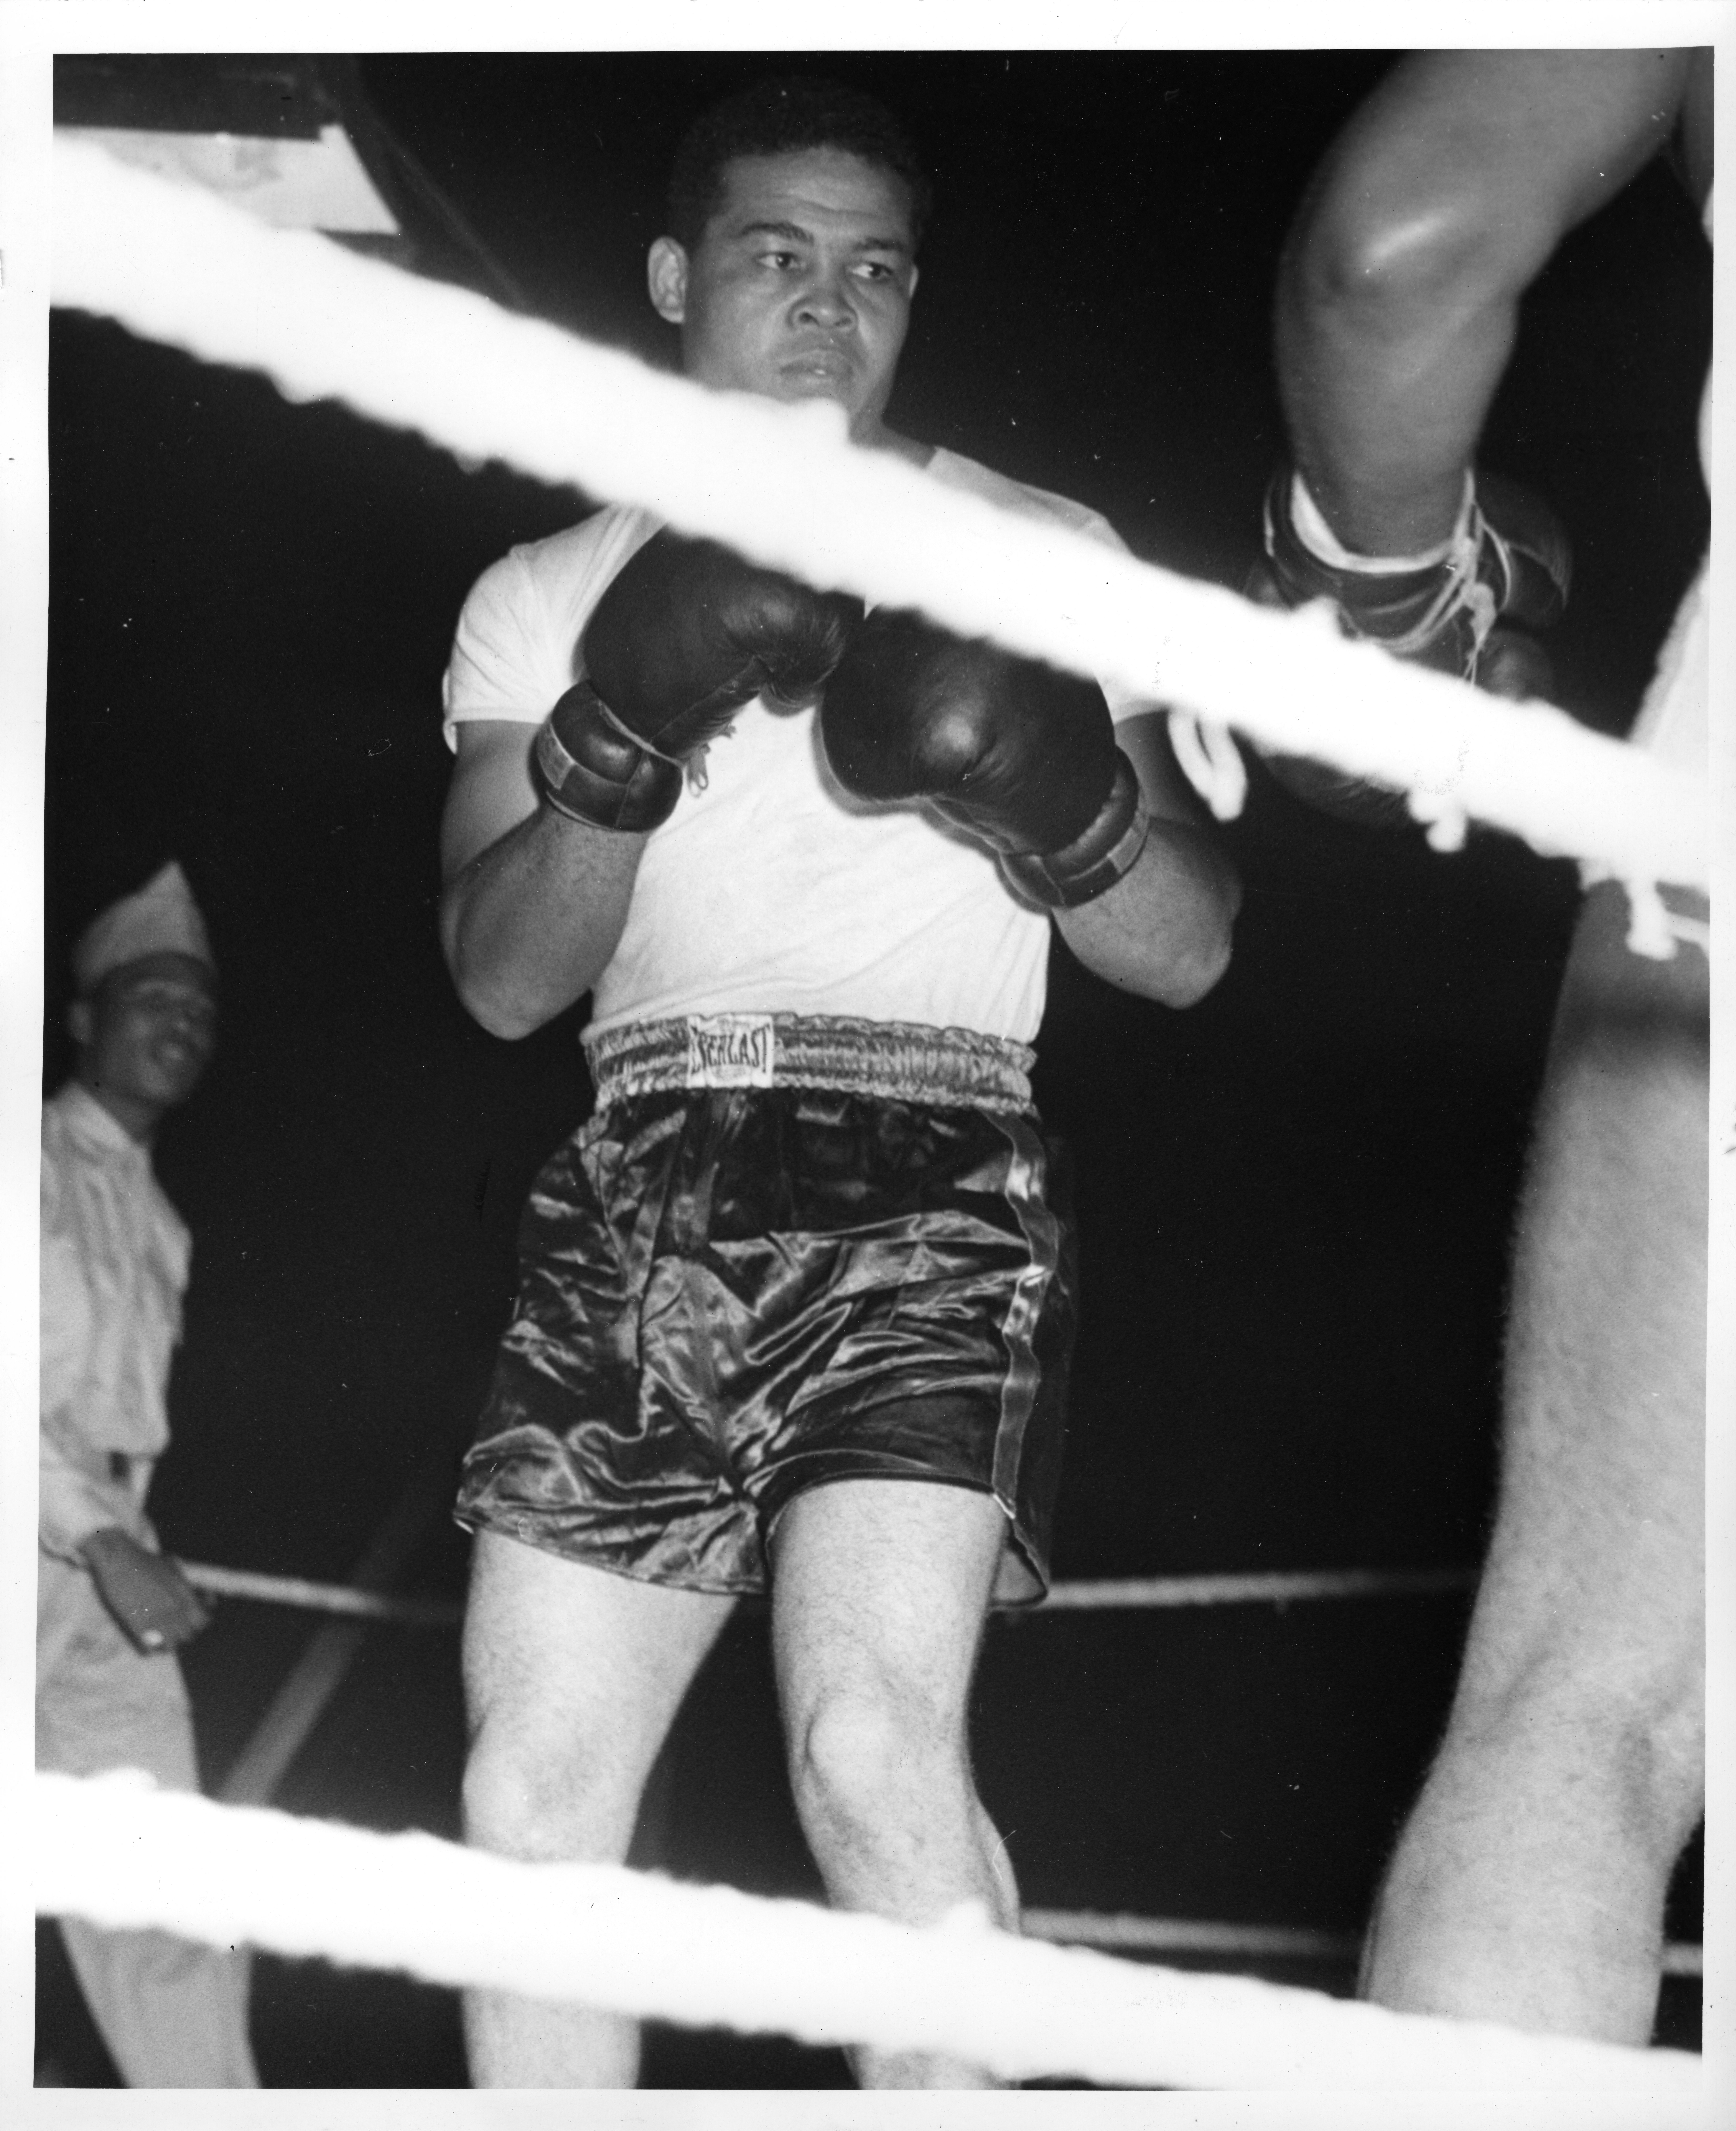 Sgt. Joe Louis in Boxing Exhibition - National Archives identifier: 138926088